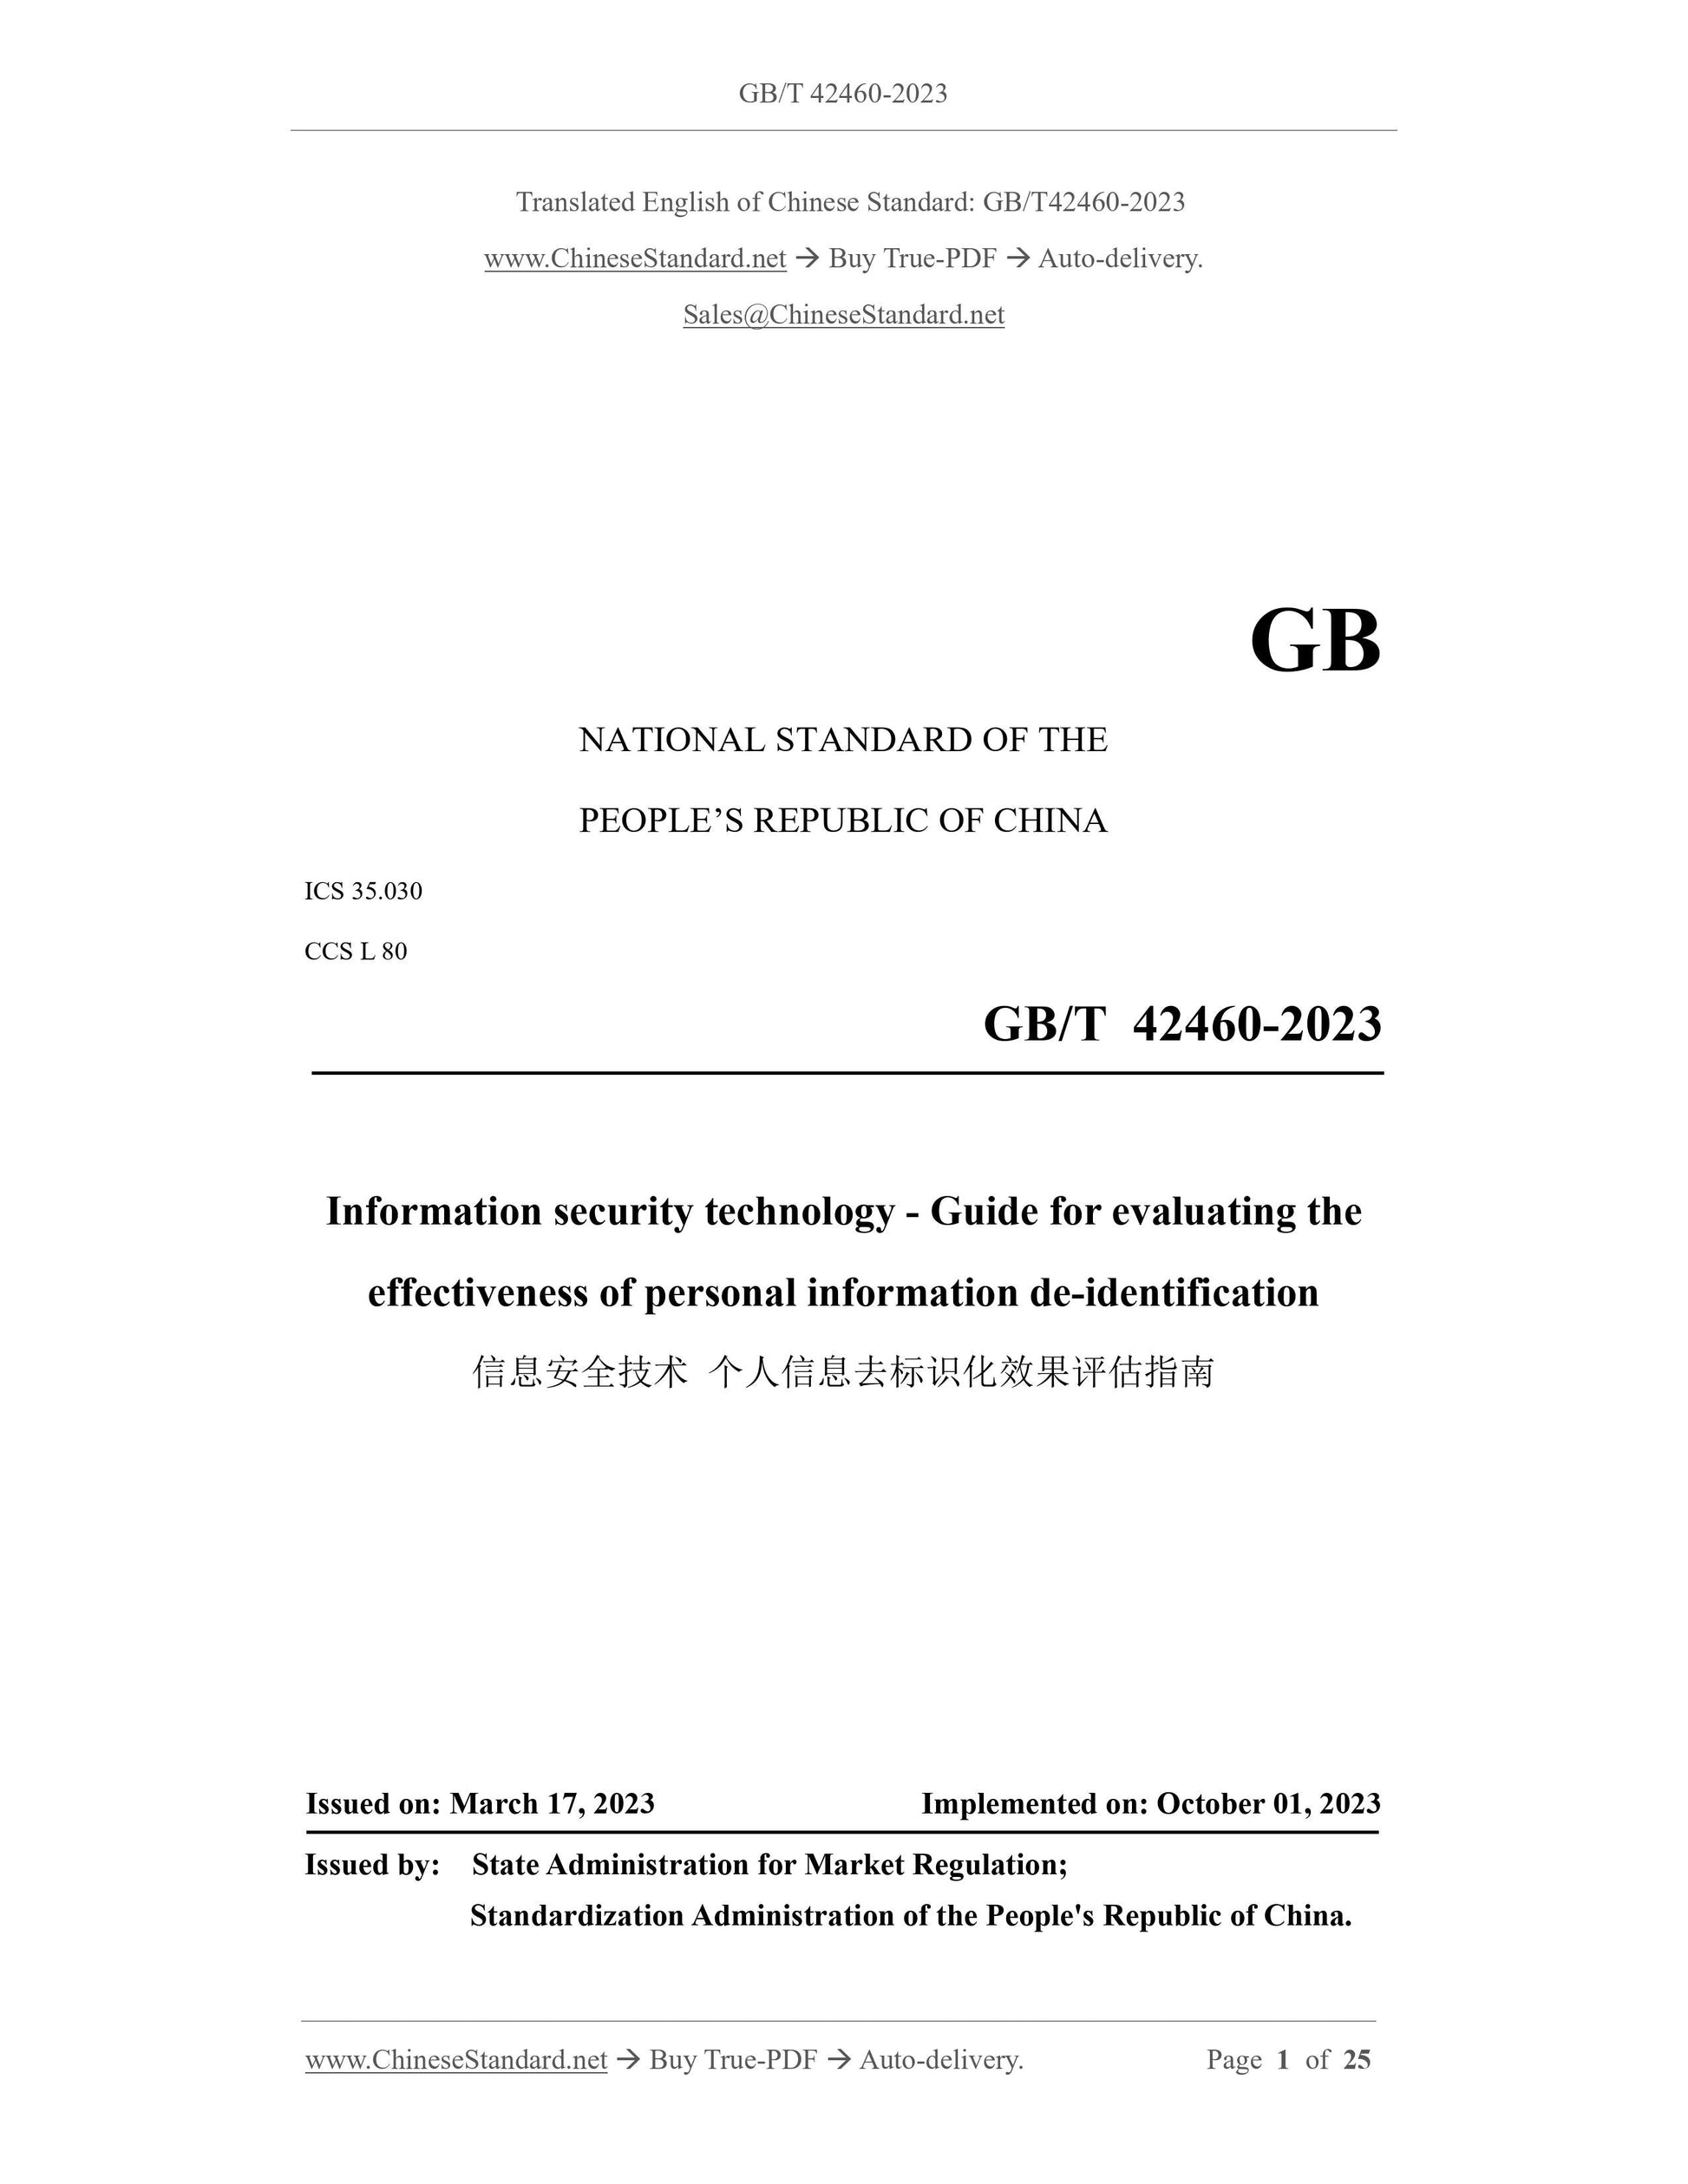 GB/T 42460-2023 Page 1